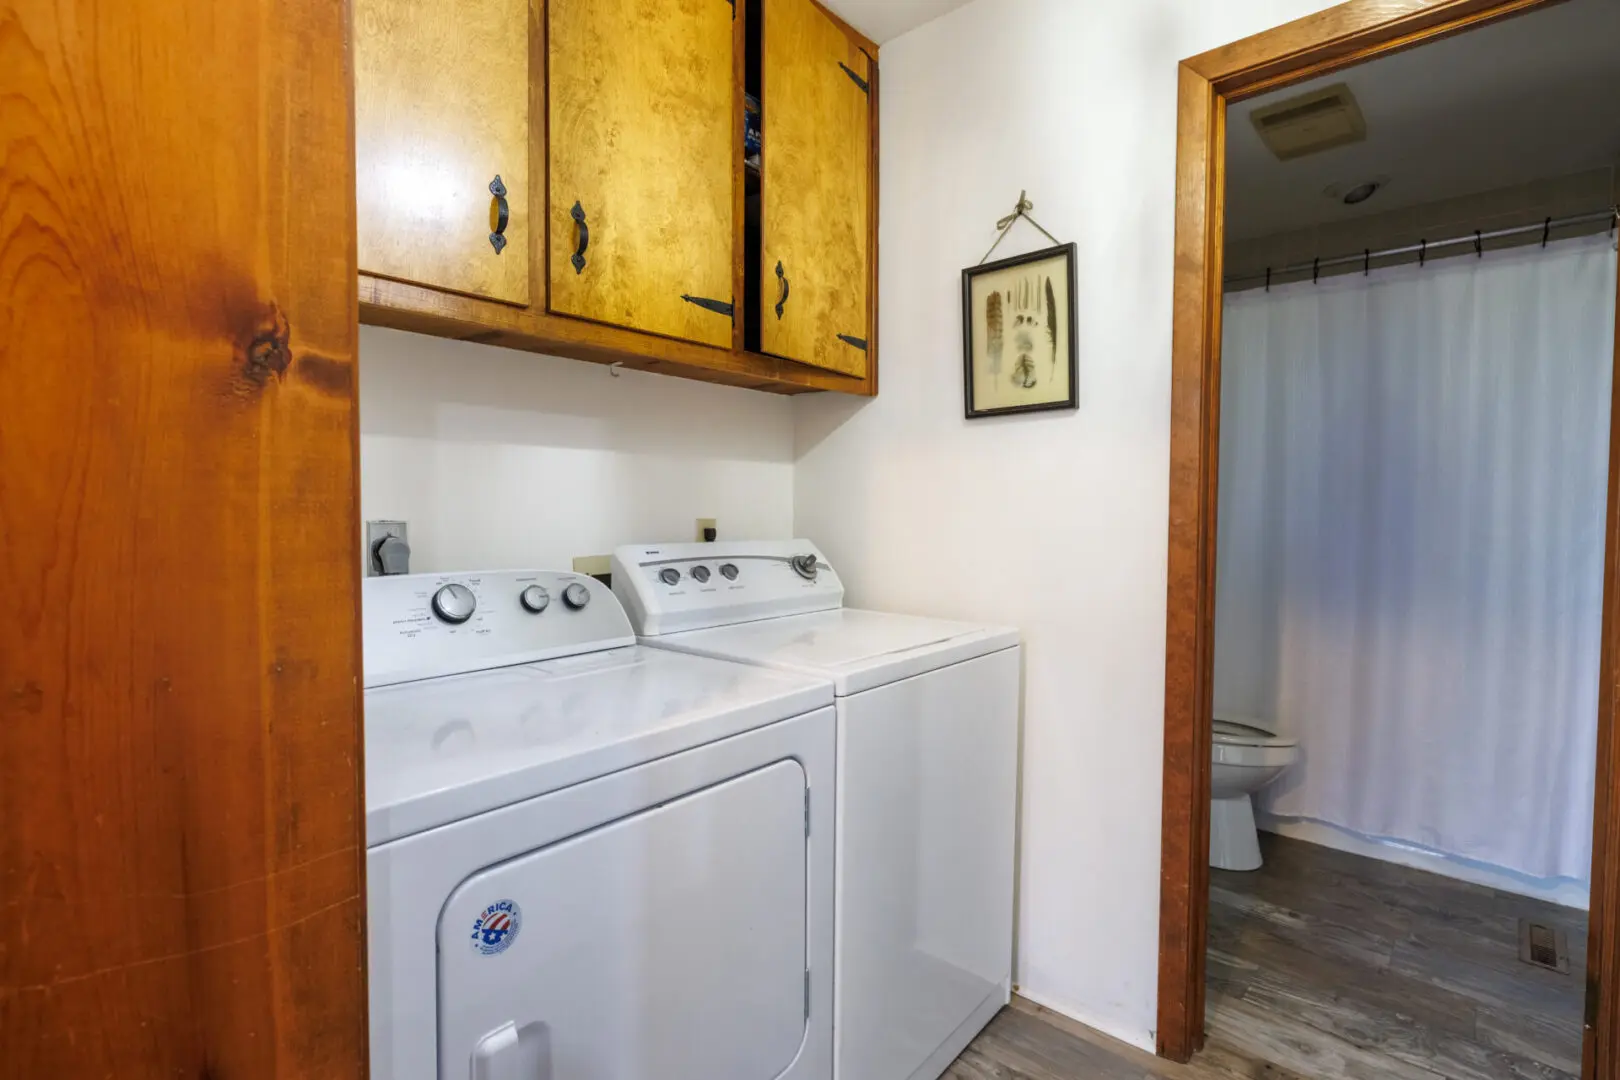 A vacation rental with a laundry room equipped with a washer and dryer.